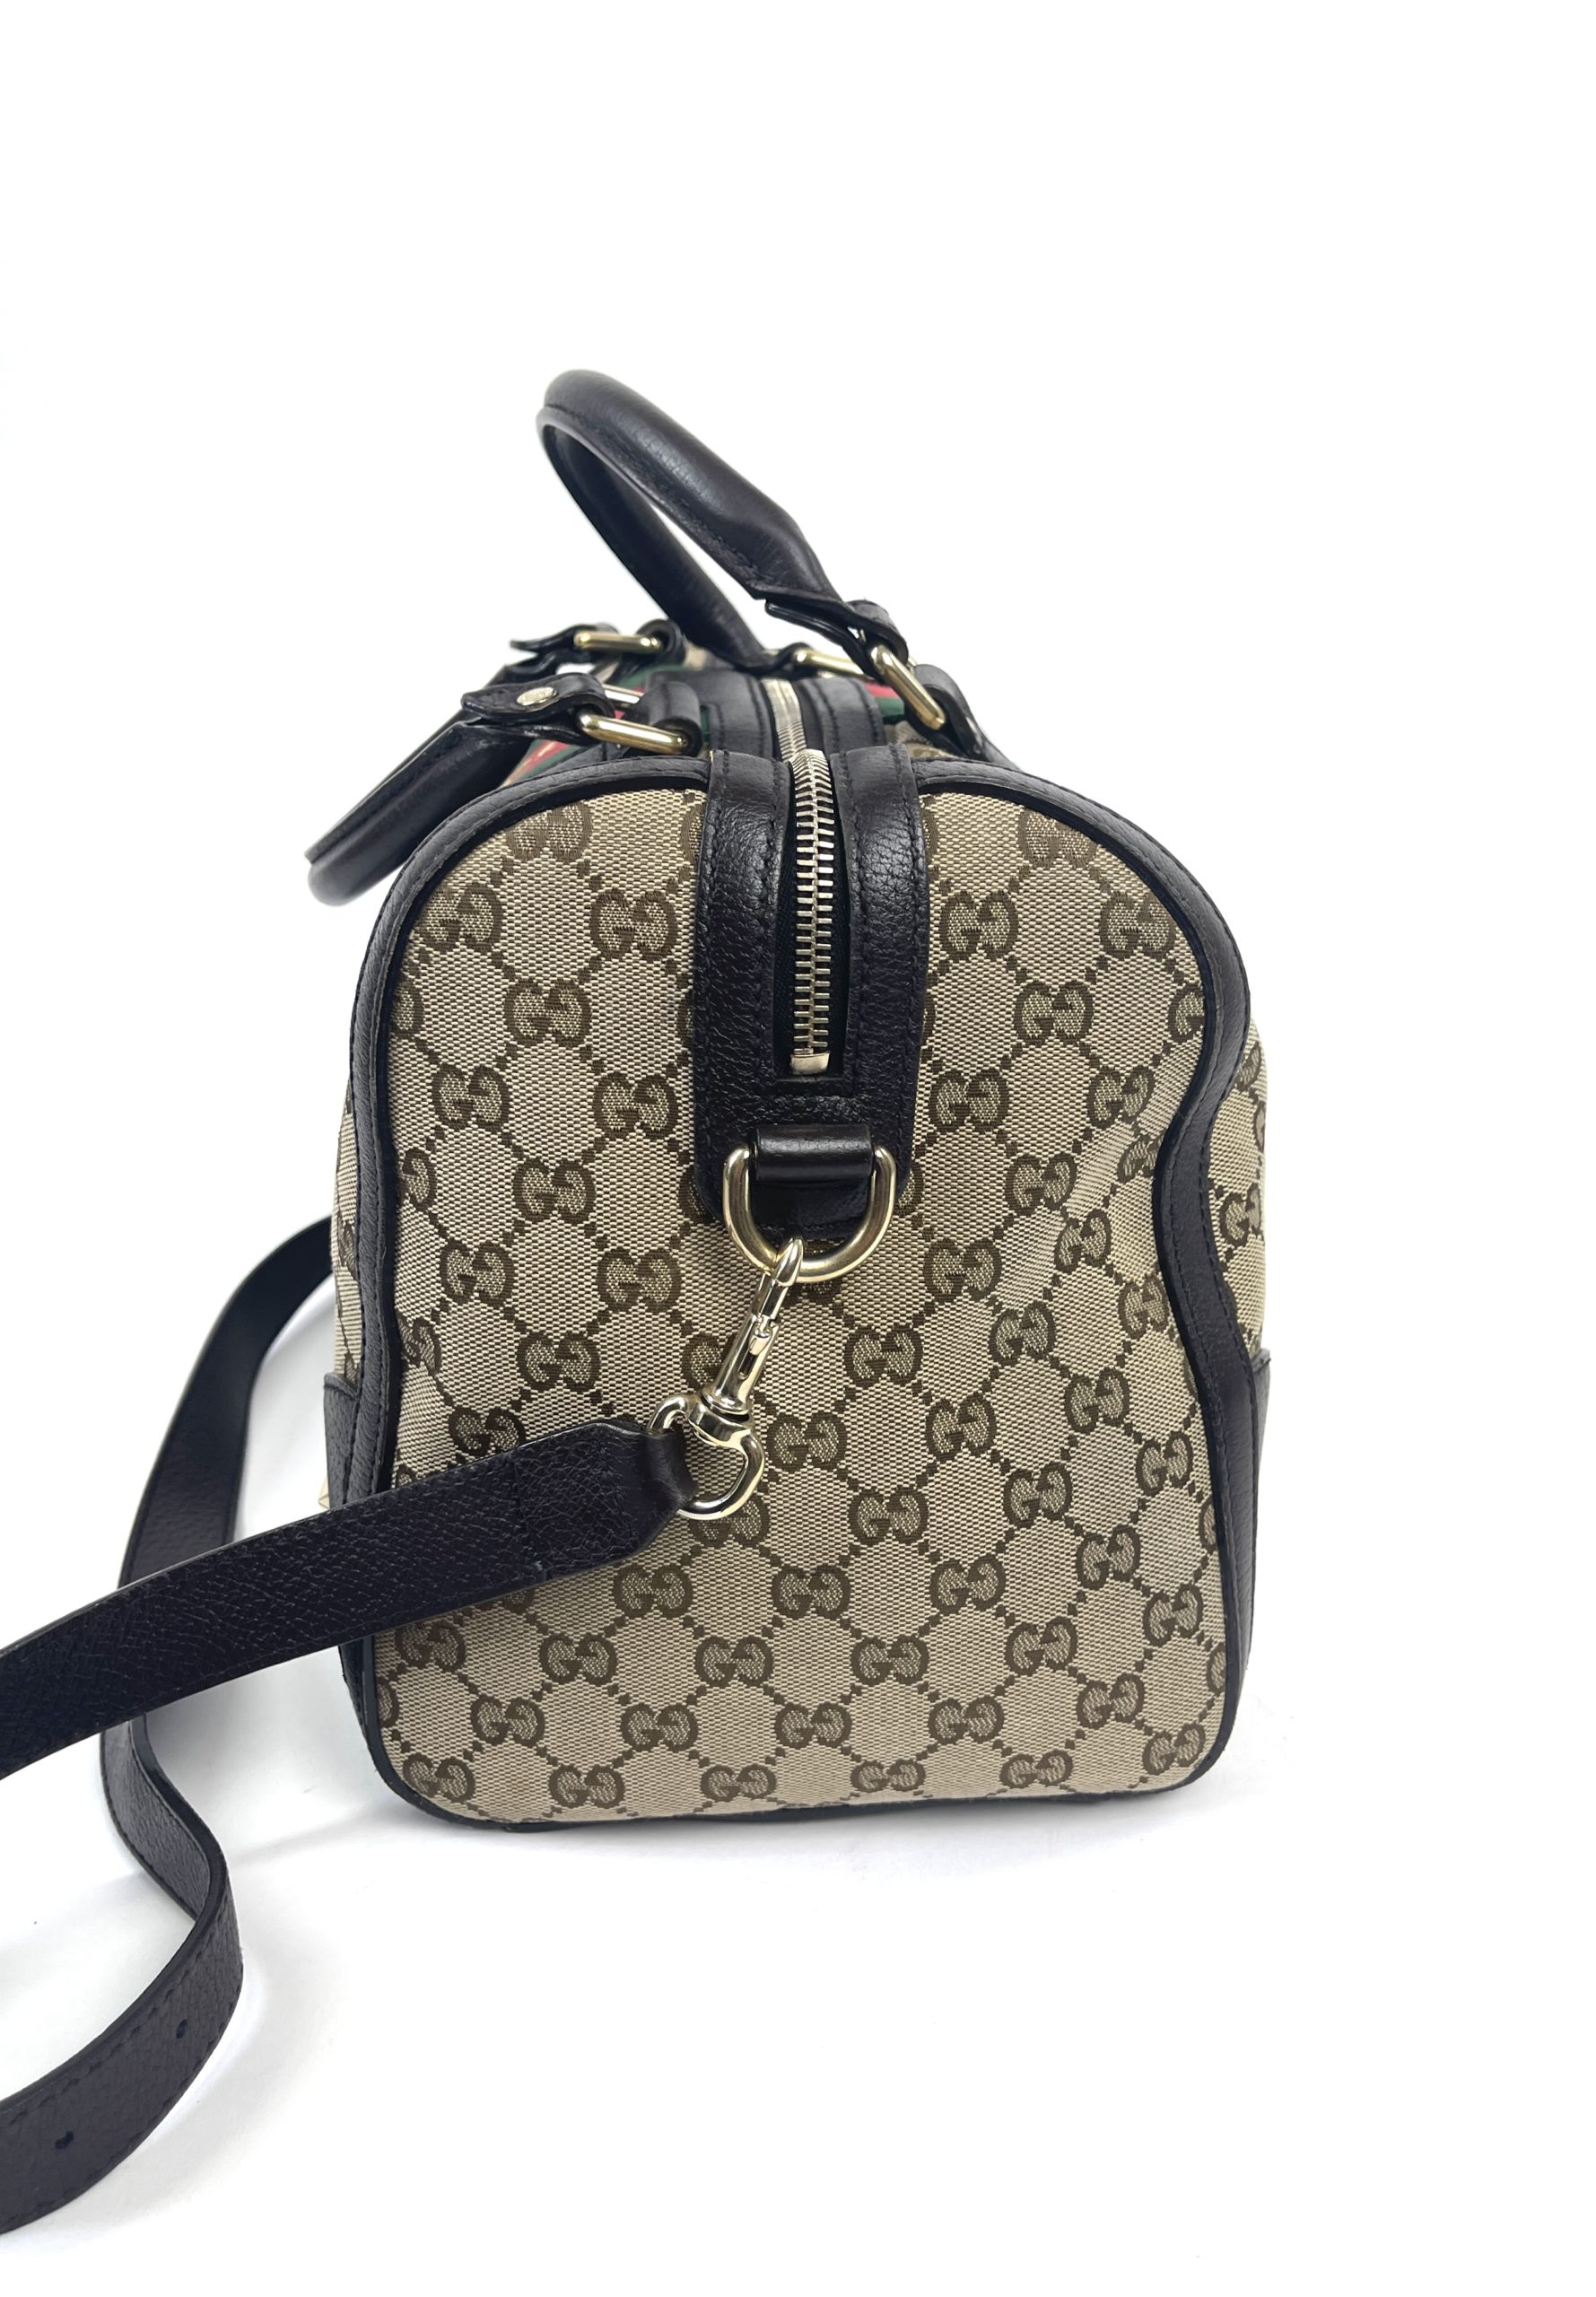 Gucci Black Canvas Web Stripe Crossbody Bag – Queen Bee of Beverly